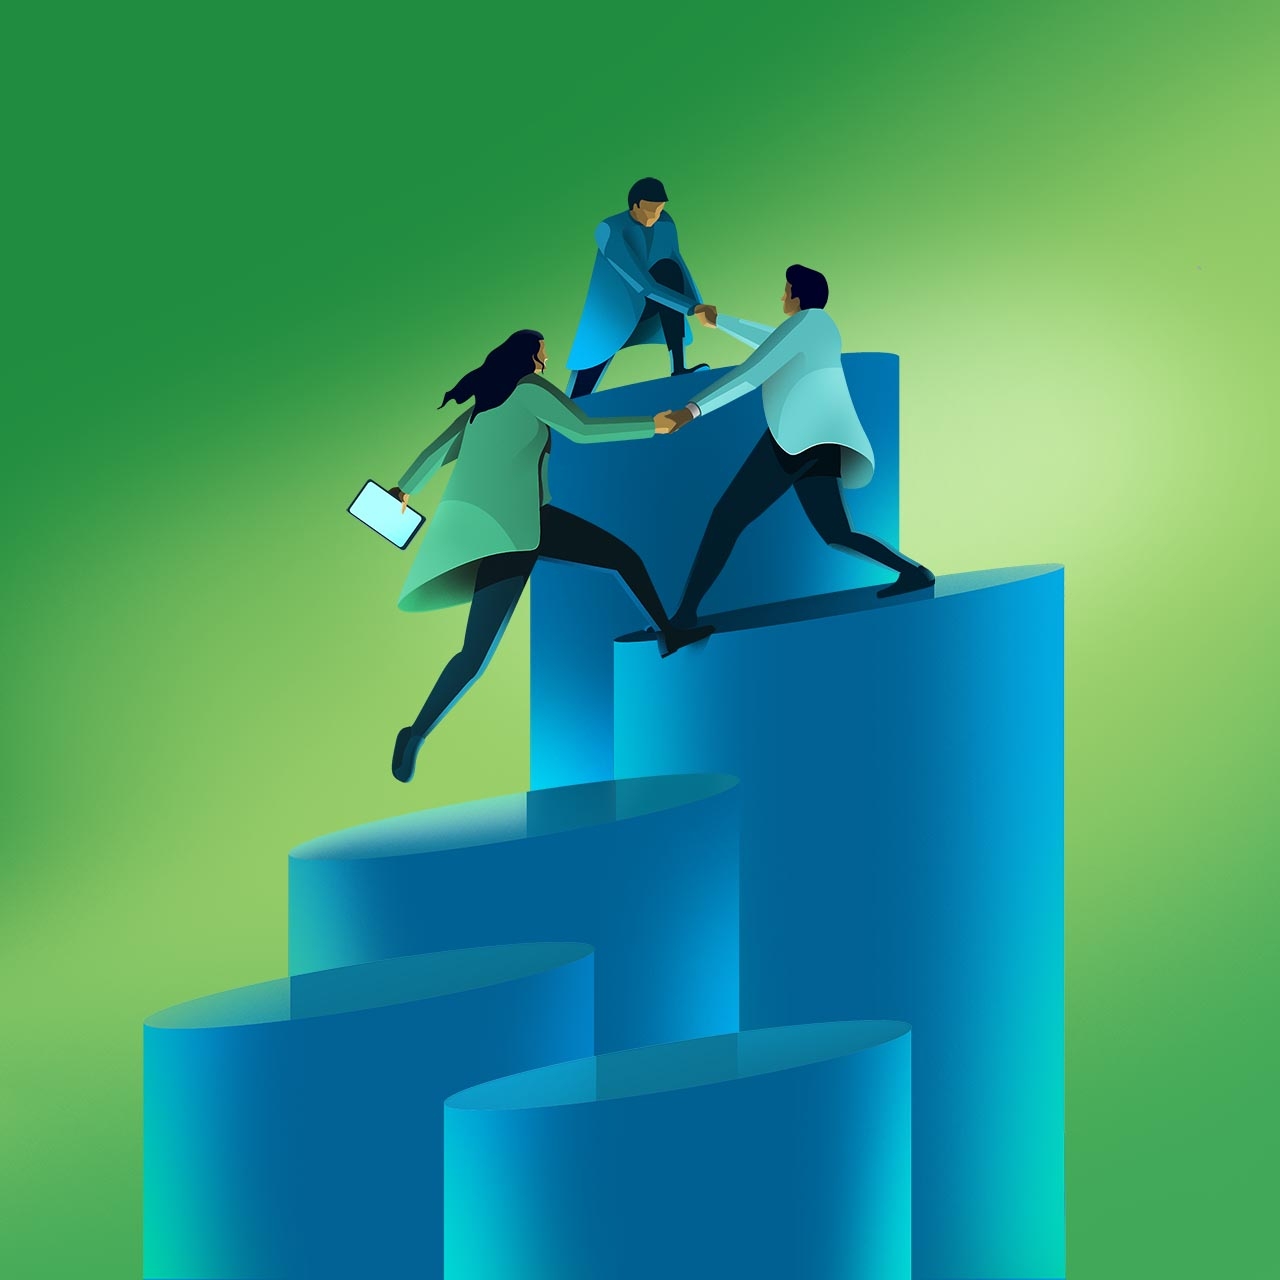 An illustration of three individuals helping each other get to the top of cylindrical steps.